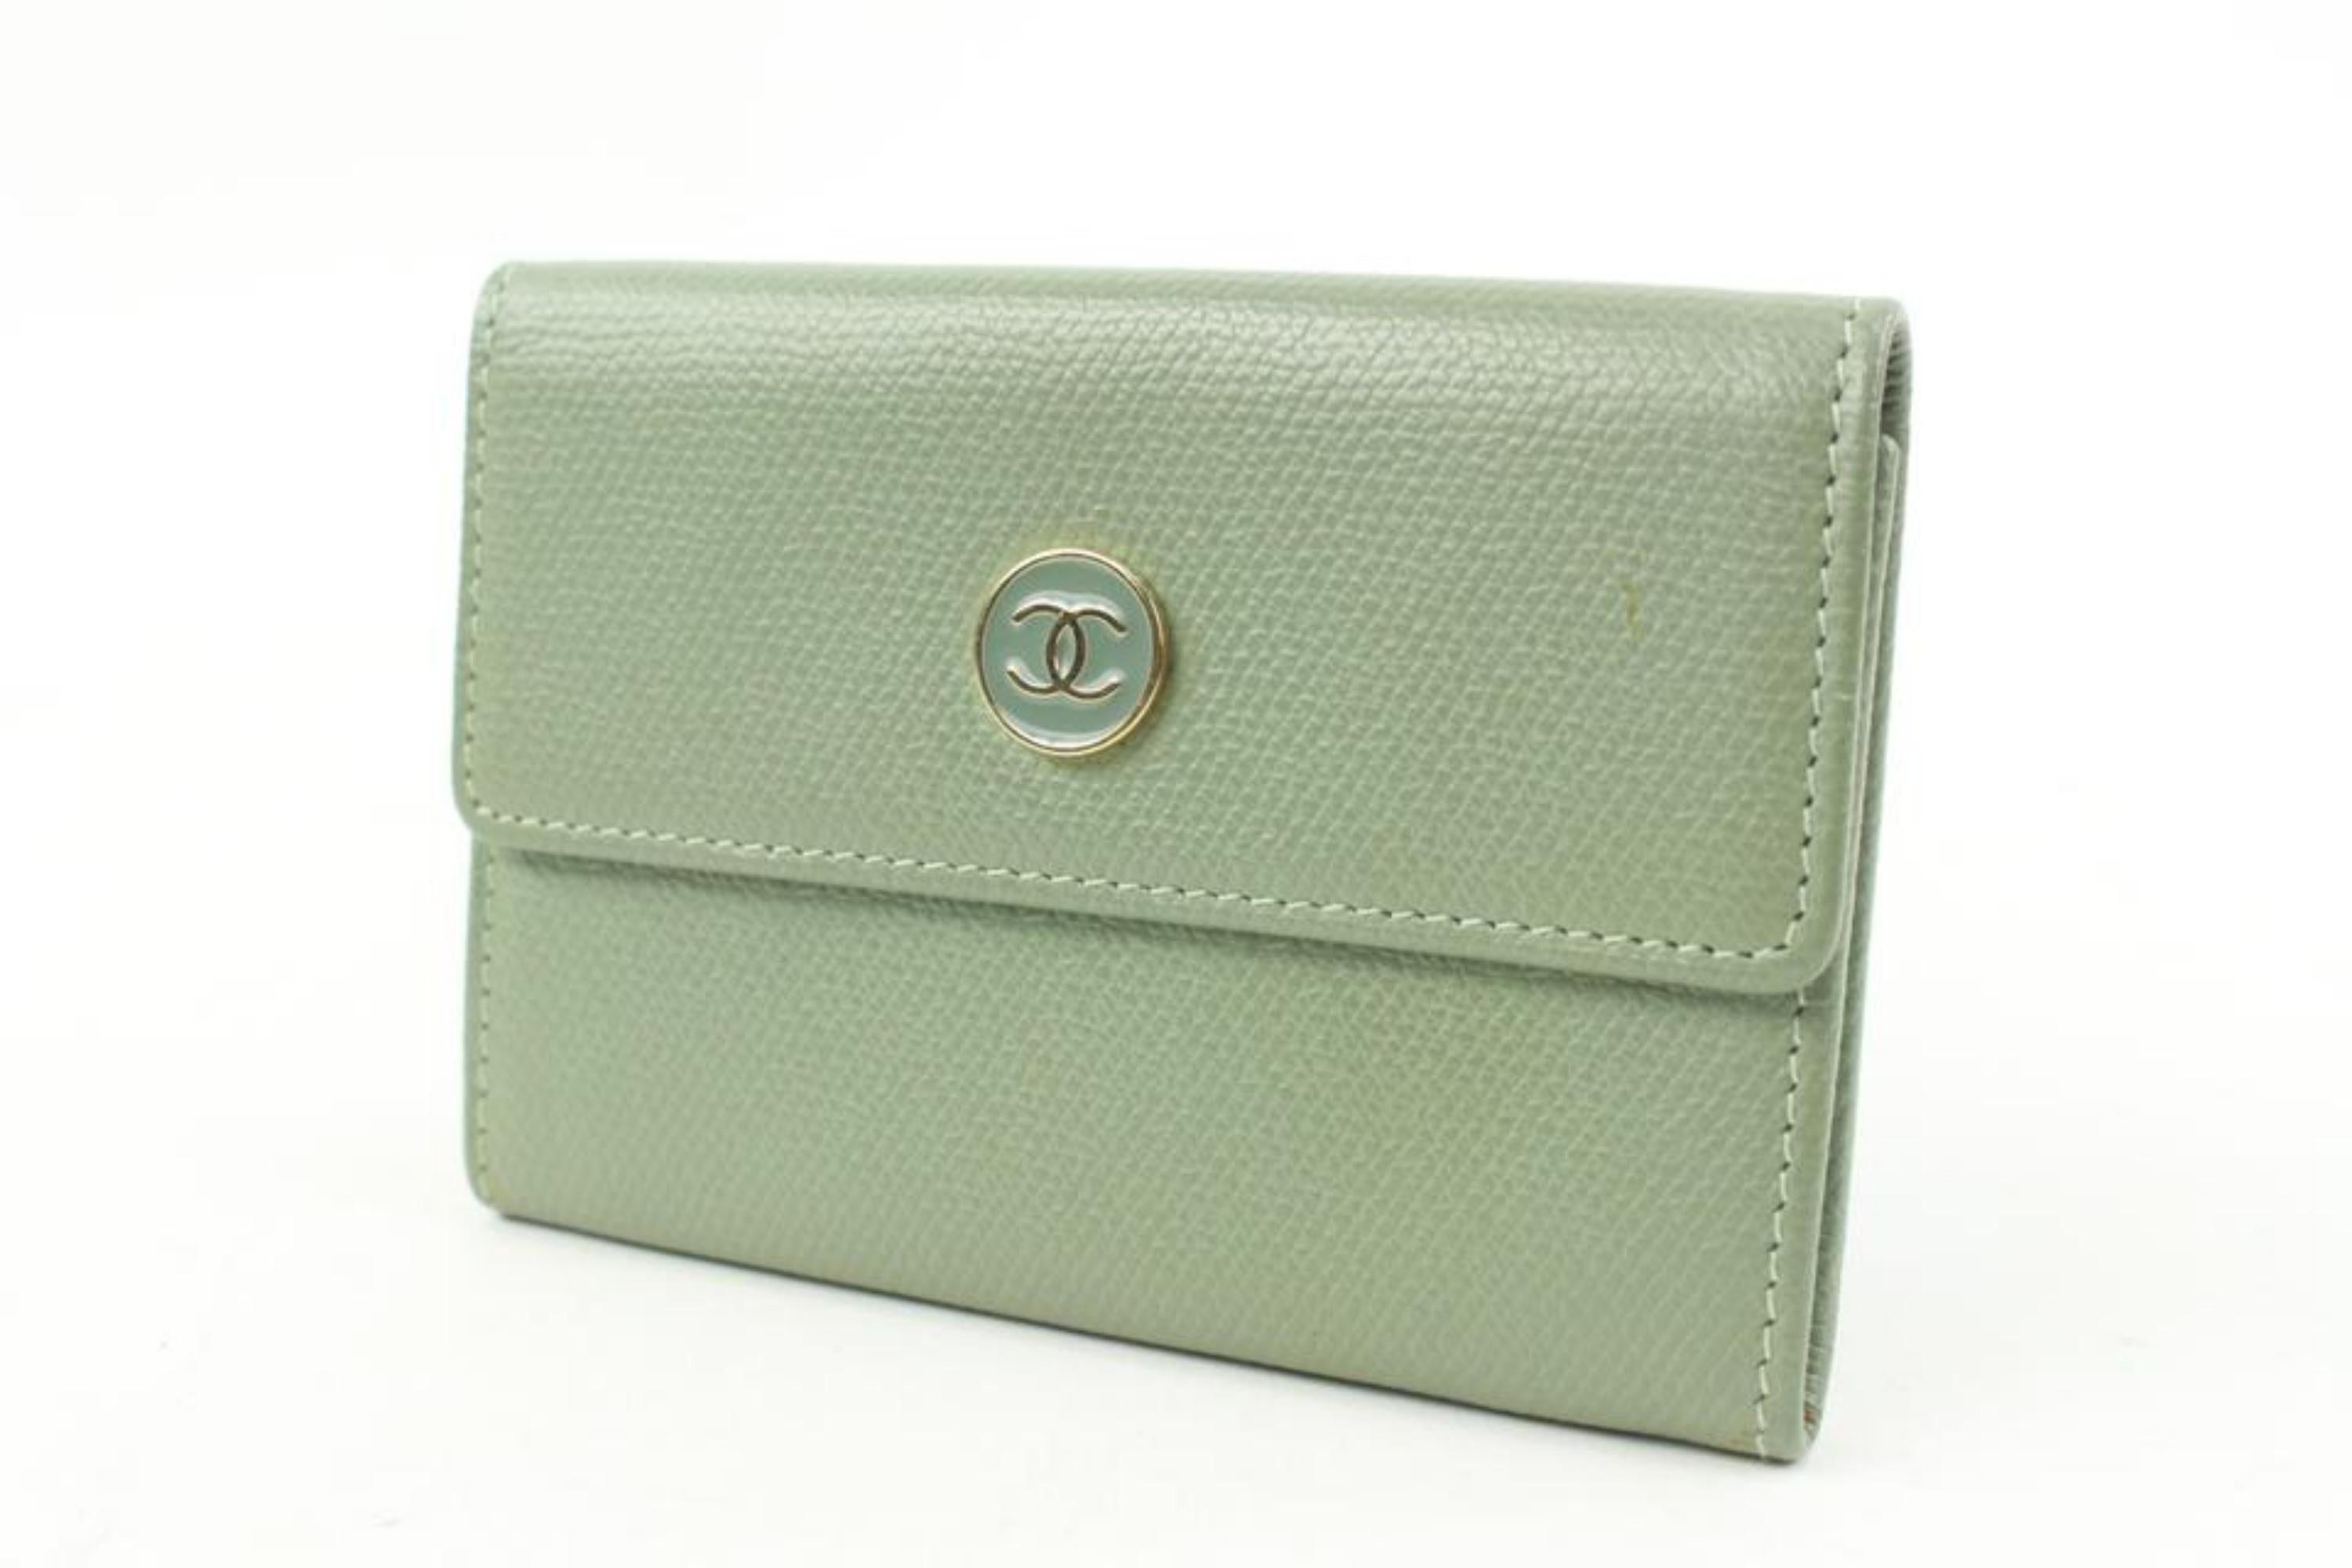 Chanel Sage Green Calfskin Button Line Card Holder Wallet Case 93ck228s
Date Code/Serial Number: 9806224
Made In: Italy
Measurements: Length:  4